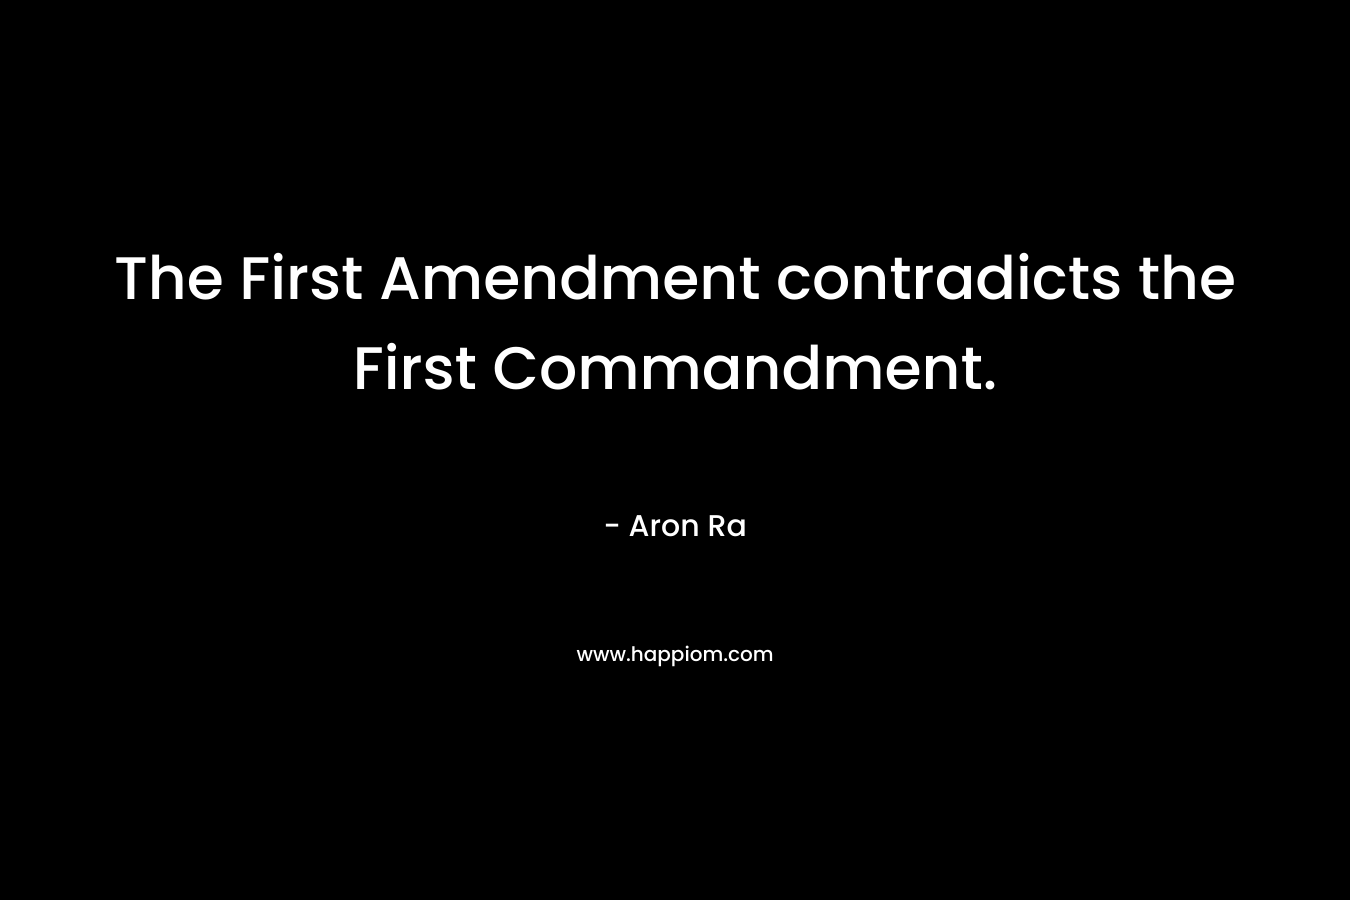 The First Amendment contradicts the First Commandment.